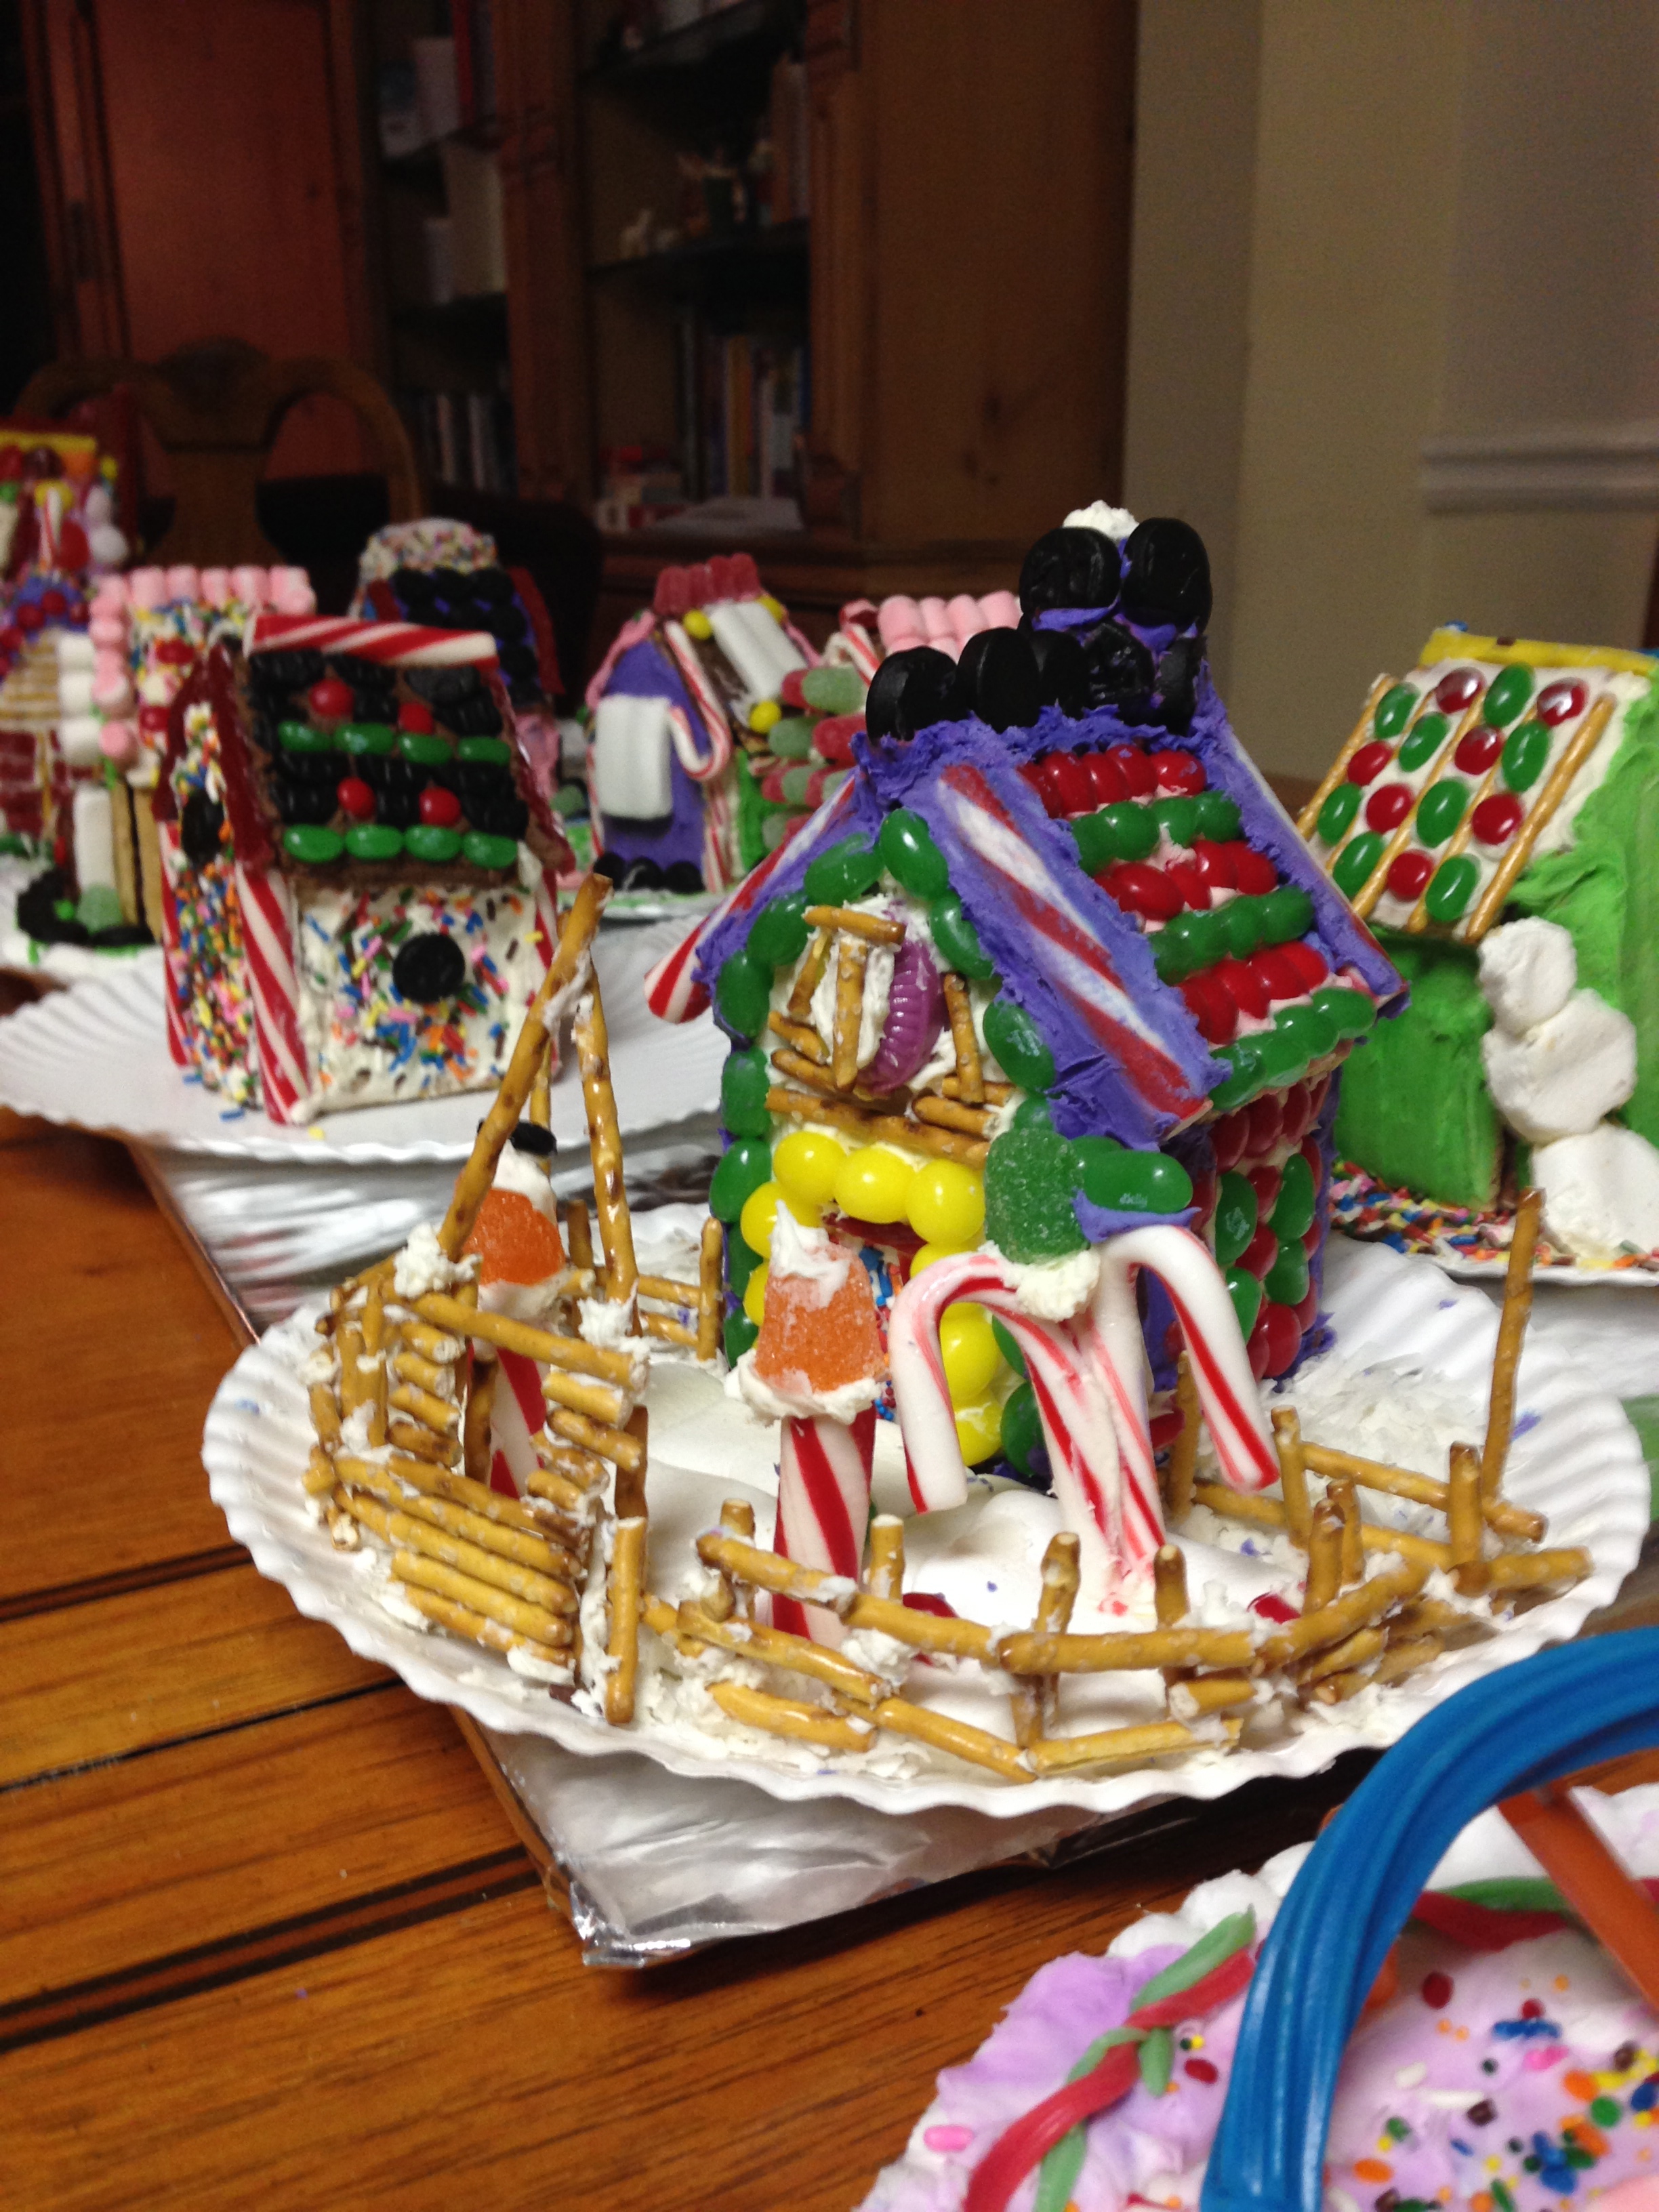 Gingerbread Contest Update: And the competitors are…